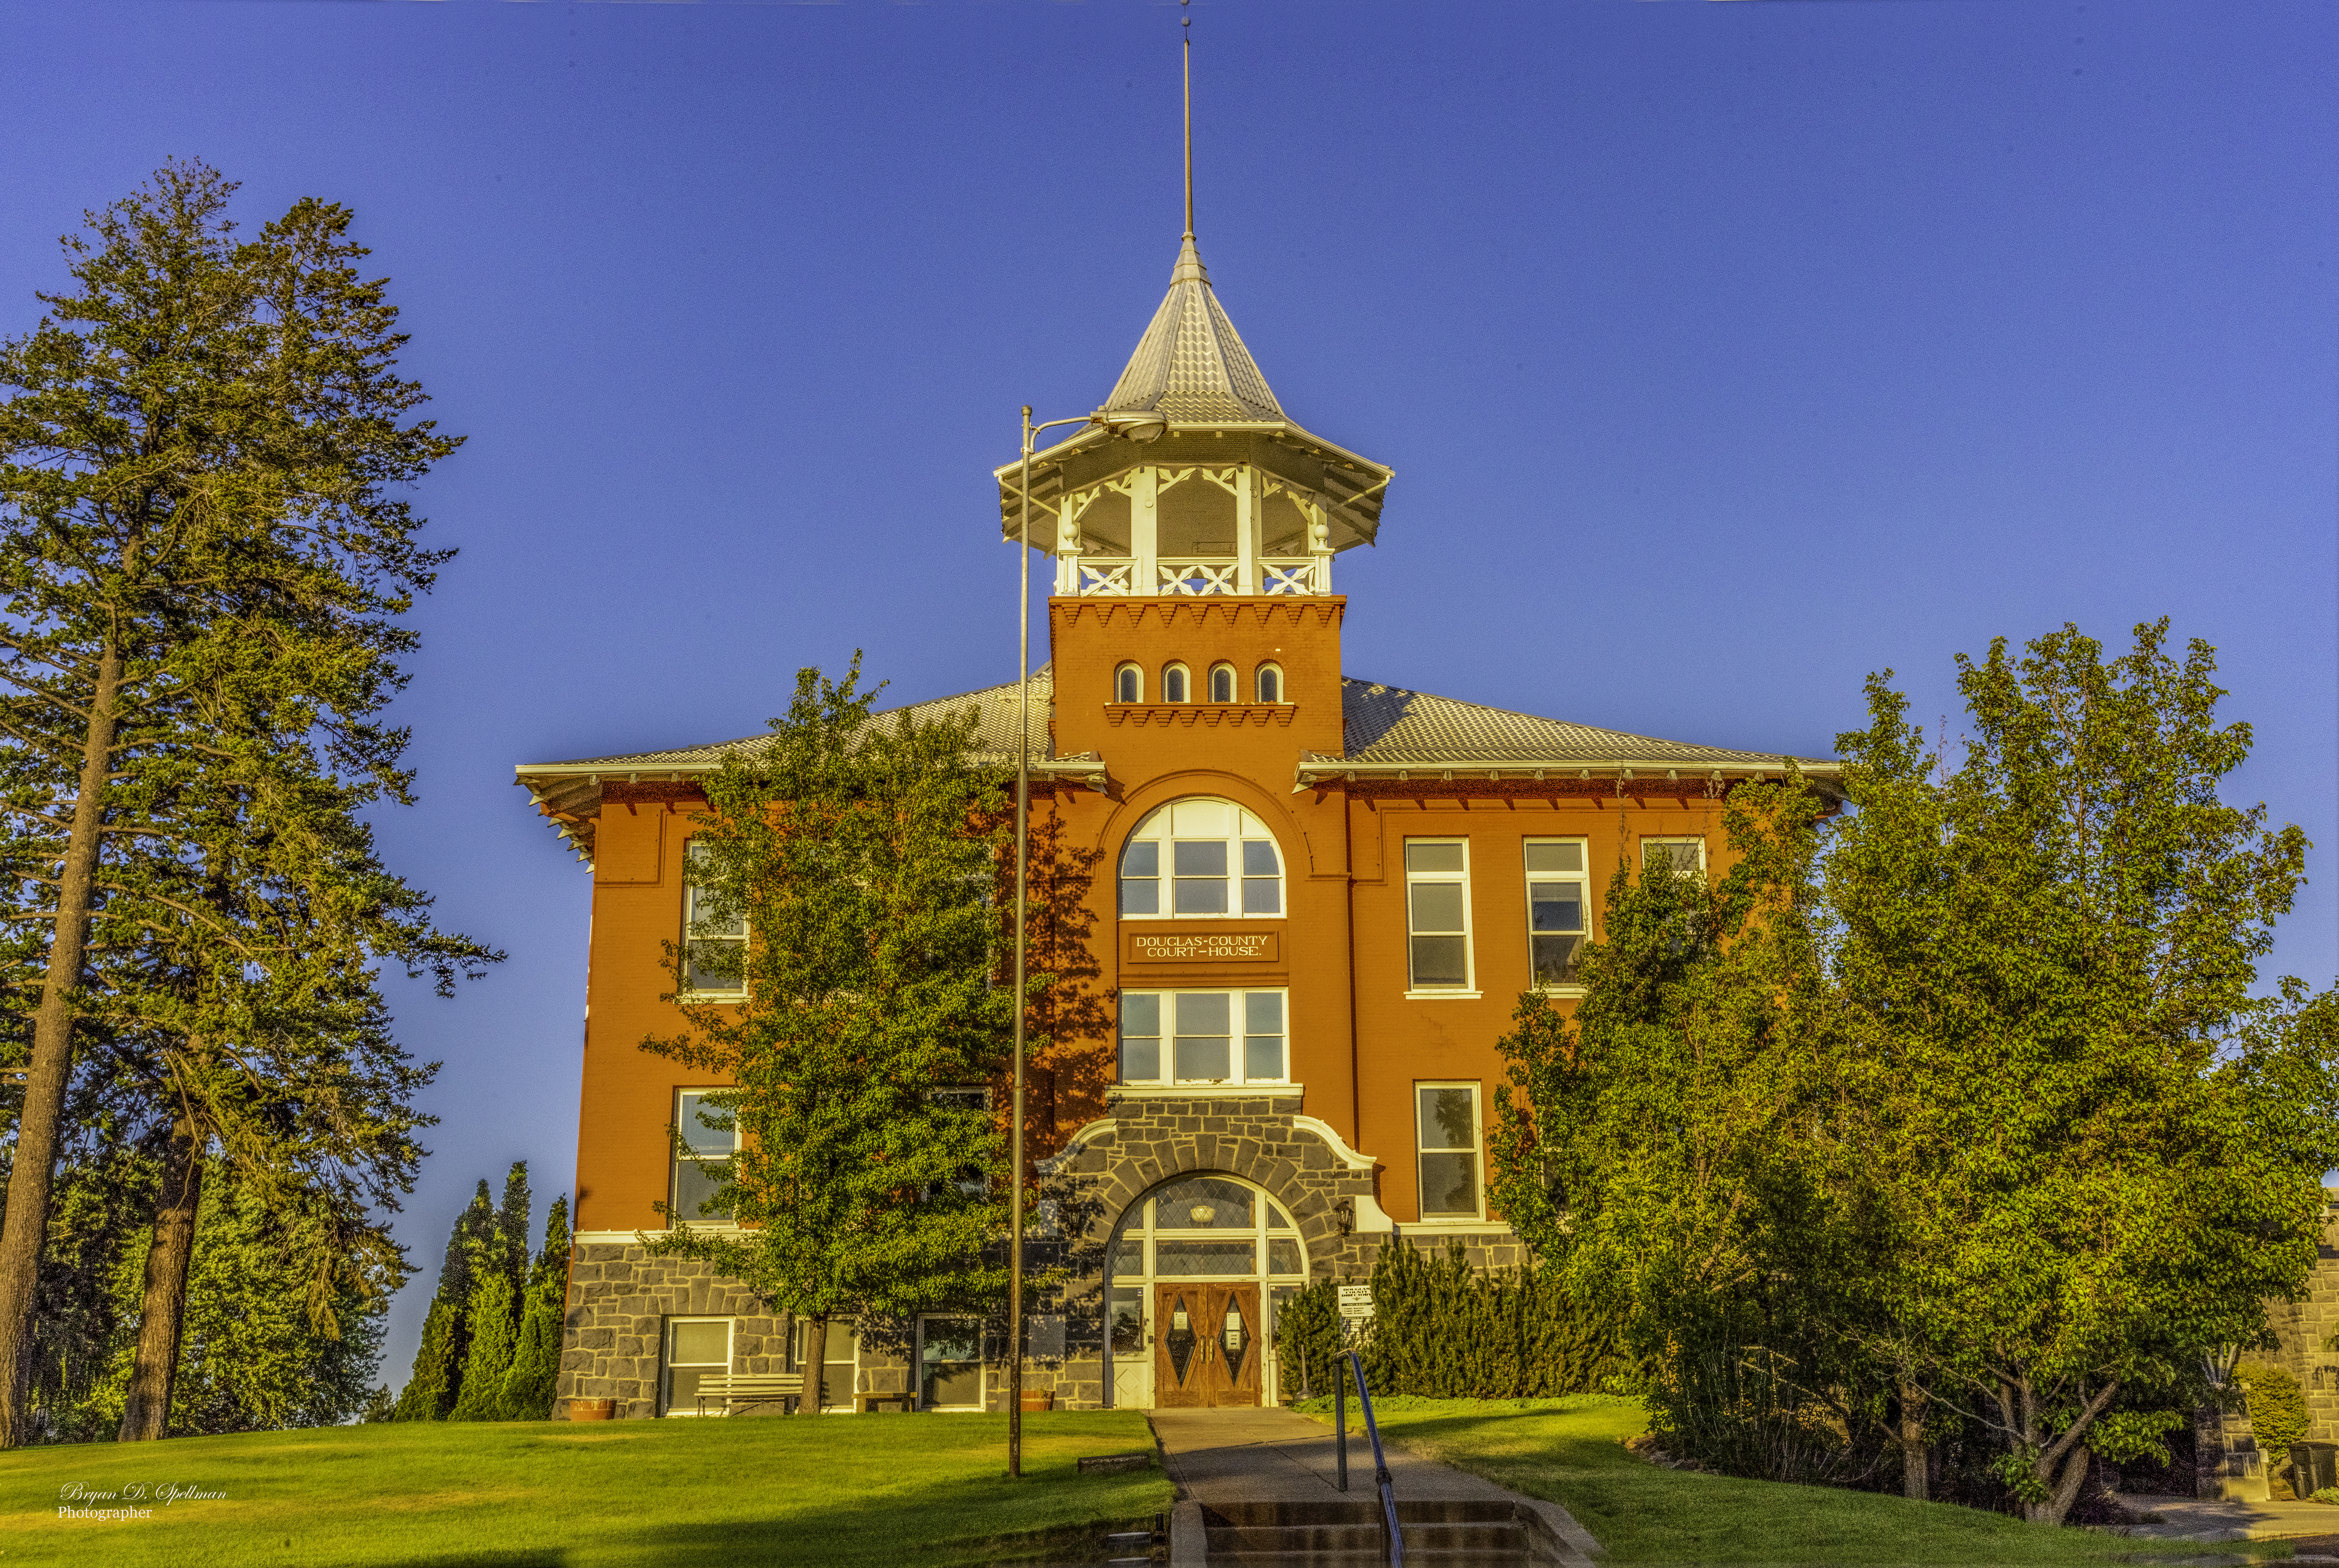 The Douglas County Court House in Waterville, Washington.